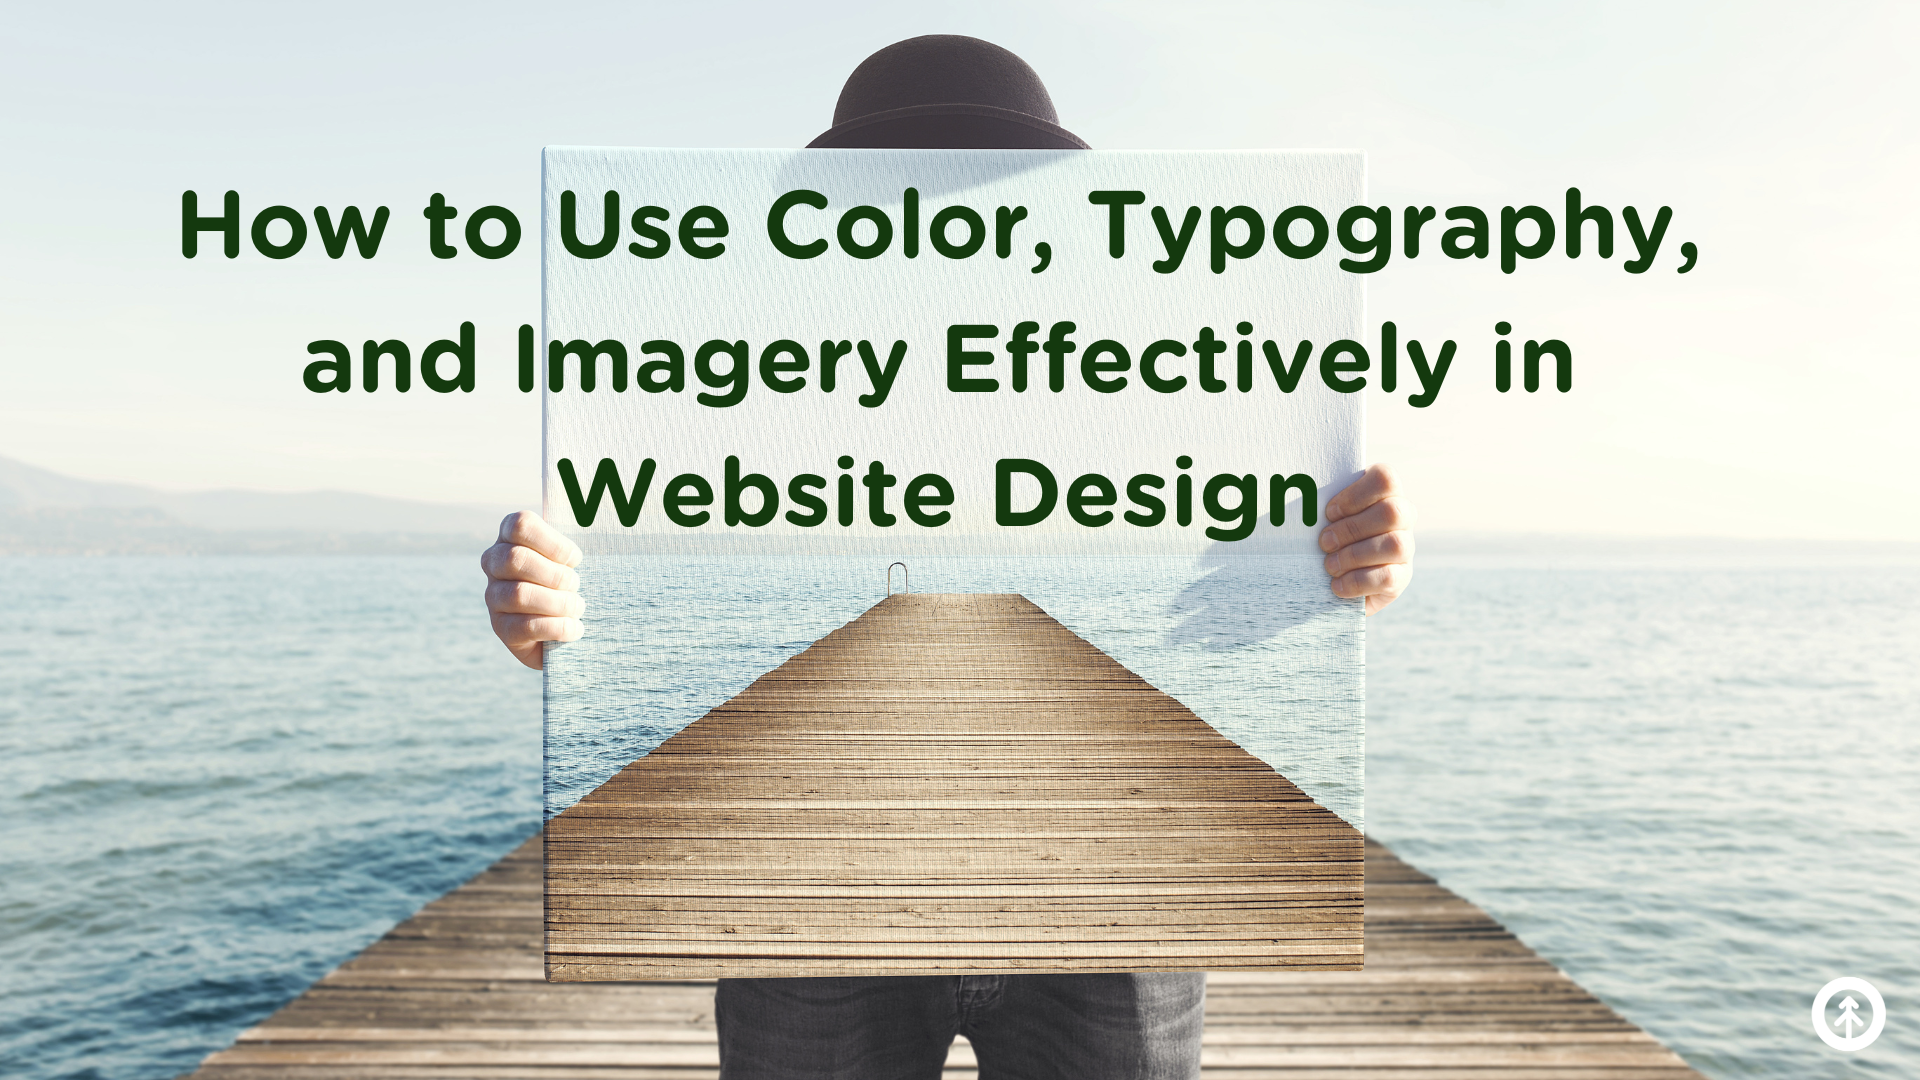 How to Use Color + Typography + Imagery Effectively in Website Design